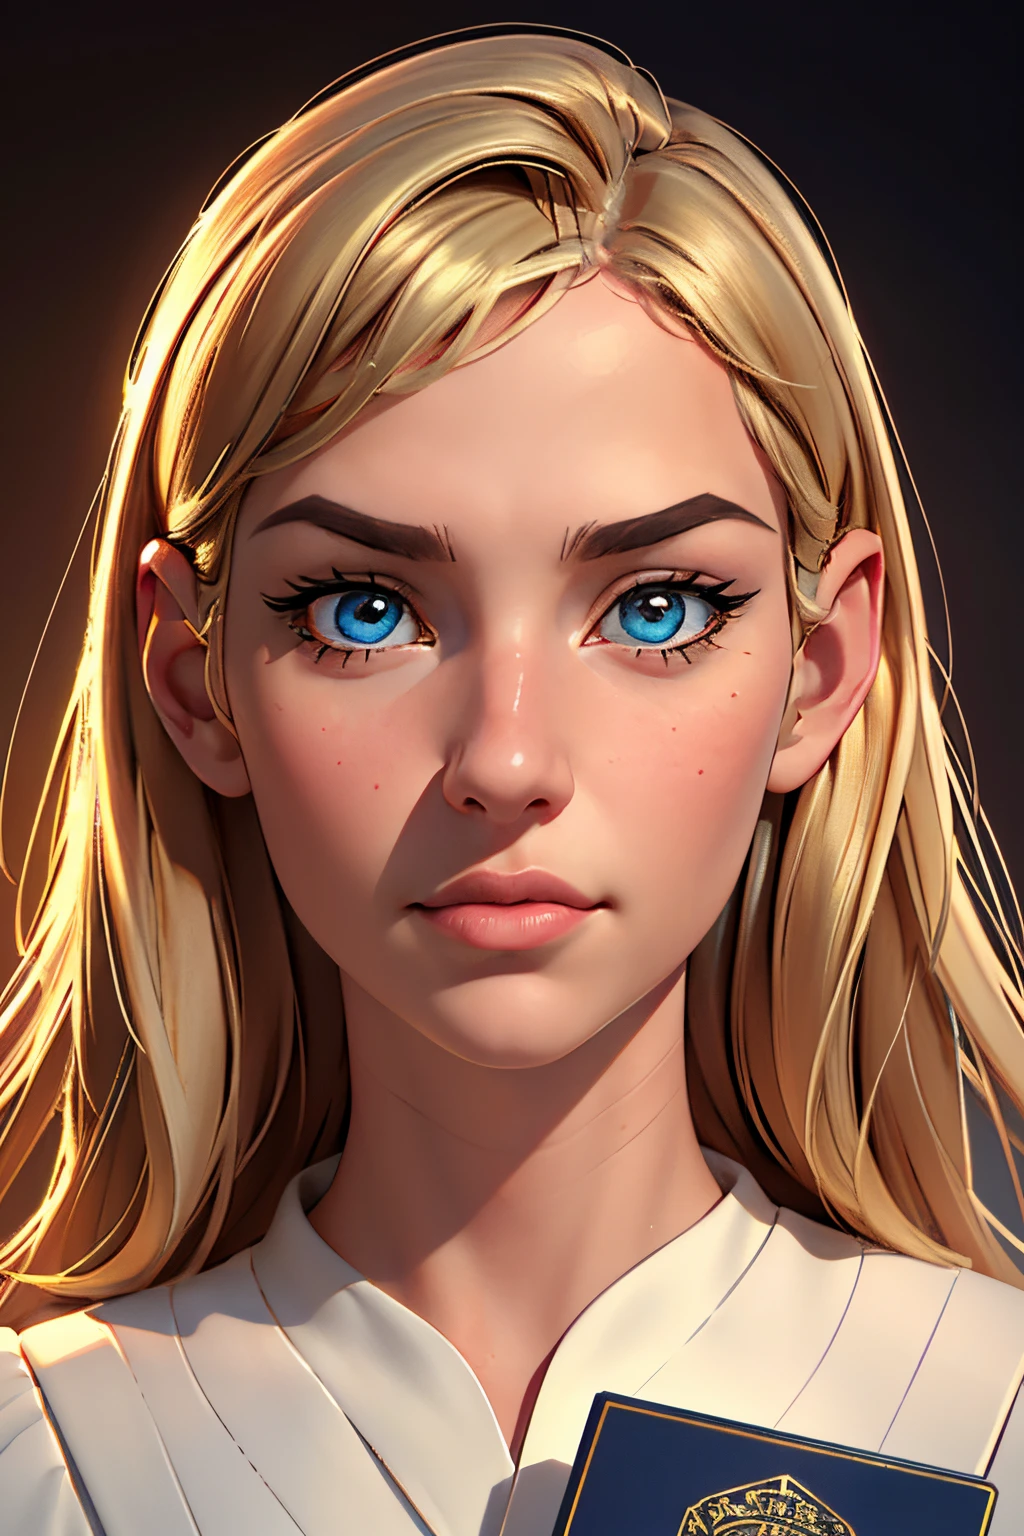 (best quality,4k,8k,highres,masterpiece:1.2),ultra-detailed,(realistic,photorealistic,photo-realistic:1.37),close up,portrait,symmetrical,passport photo,beautiful detailed eyes,beautiful detailed lips,extremely detailed eyes and face,longeyelashes,perfectly aligned eyebrows,natural skin texture,flawless complexion,glimmering highlights on the face,vivid colors,soft diffused lighting,warm color tone,sharp focus,professional artist's rendition. close up, portrait, symetric, passport photo, centralized in the middle